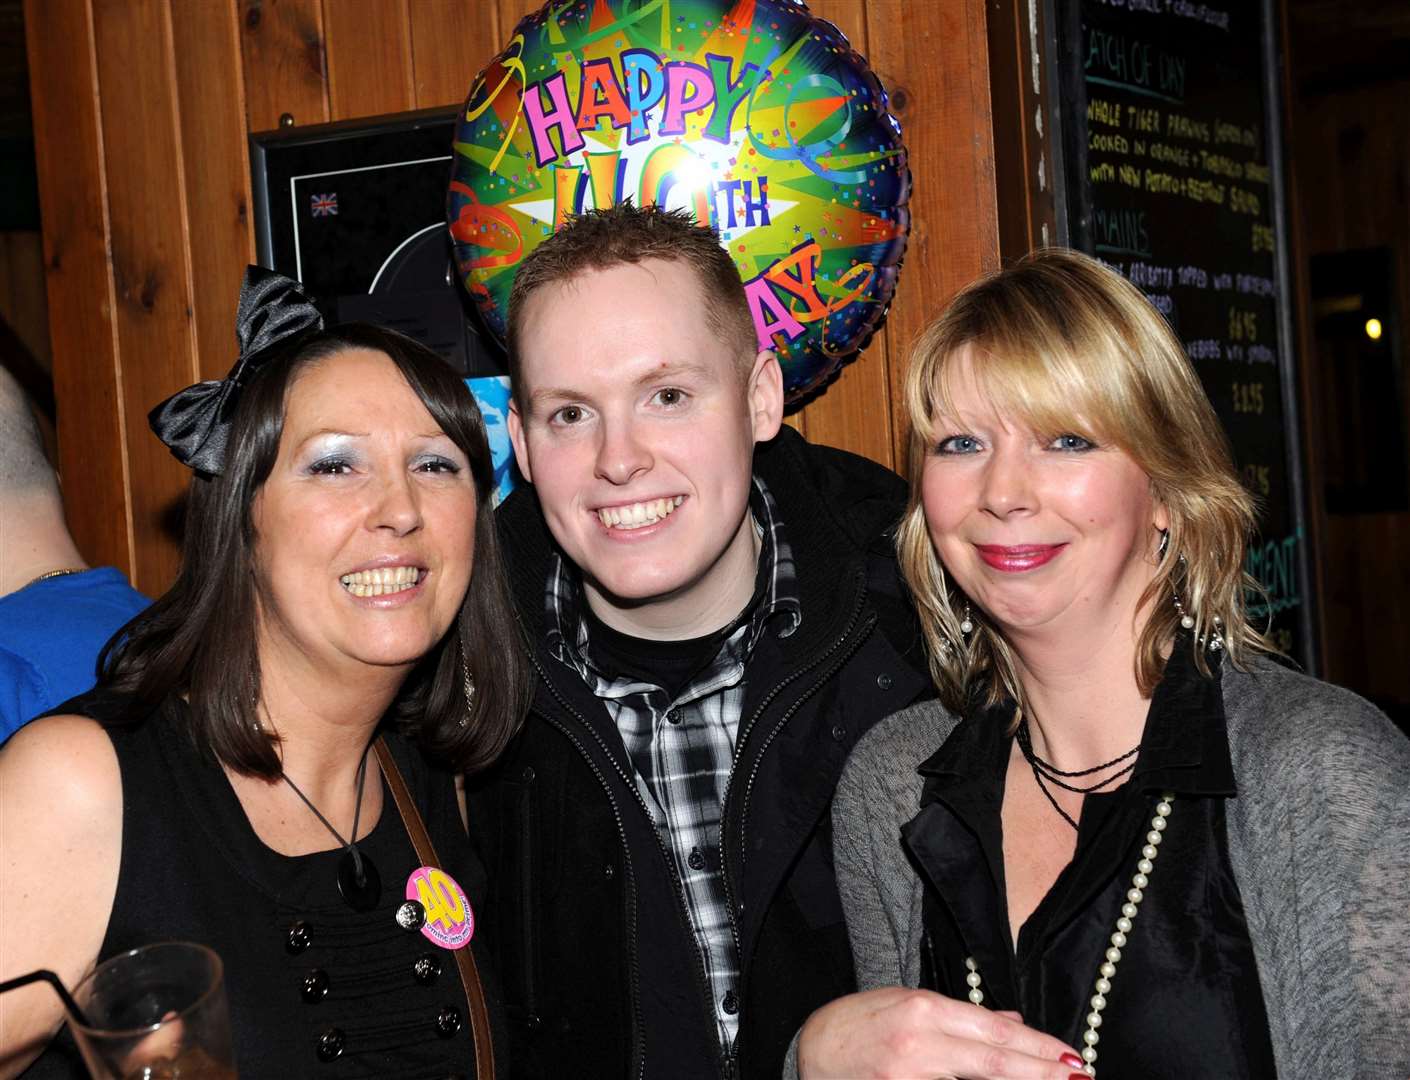 Jean Vardy on her 40th with Michael McDiarmid and Shirley Mackay all from Inverness pic taken Johnny Foxes